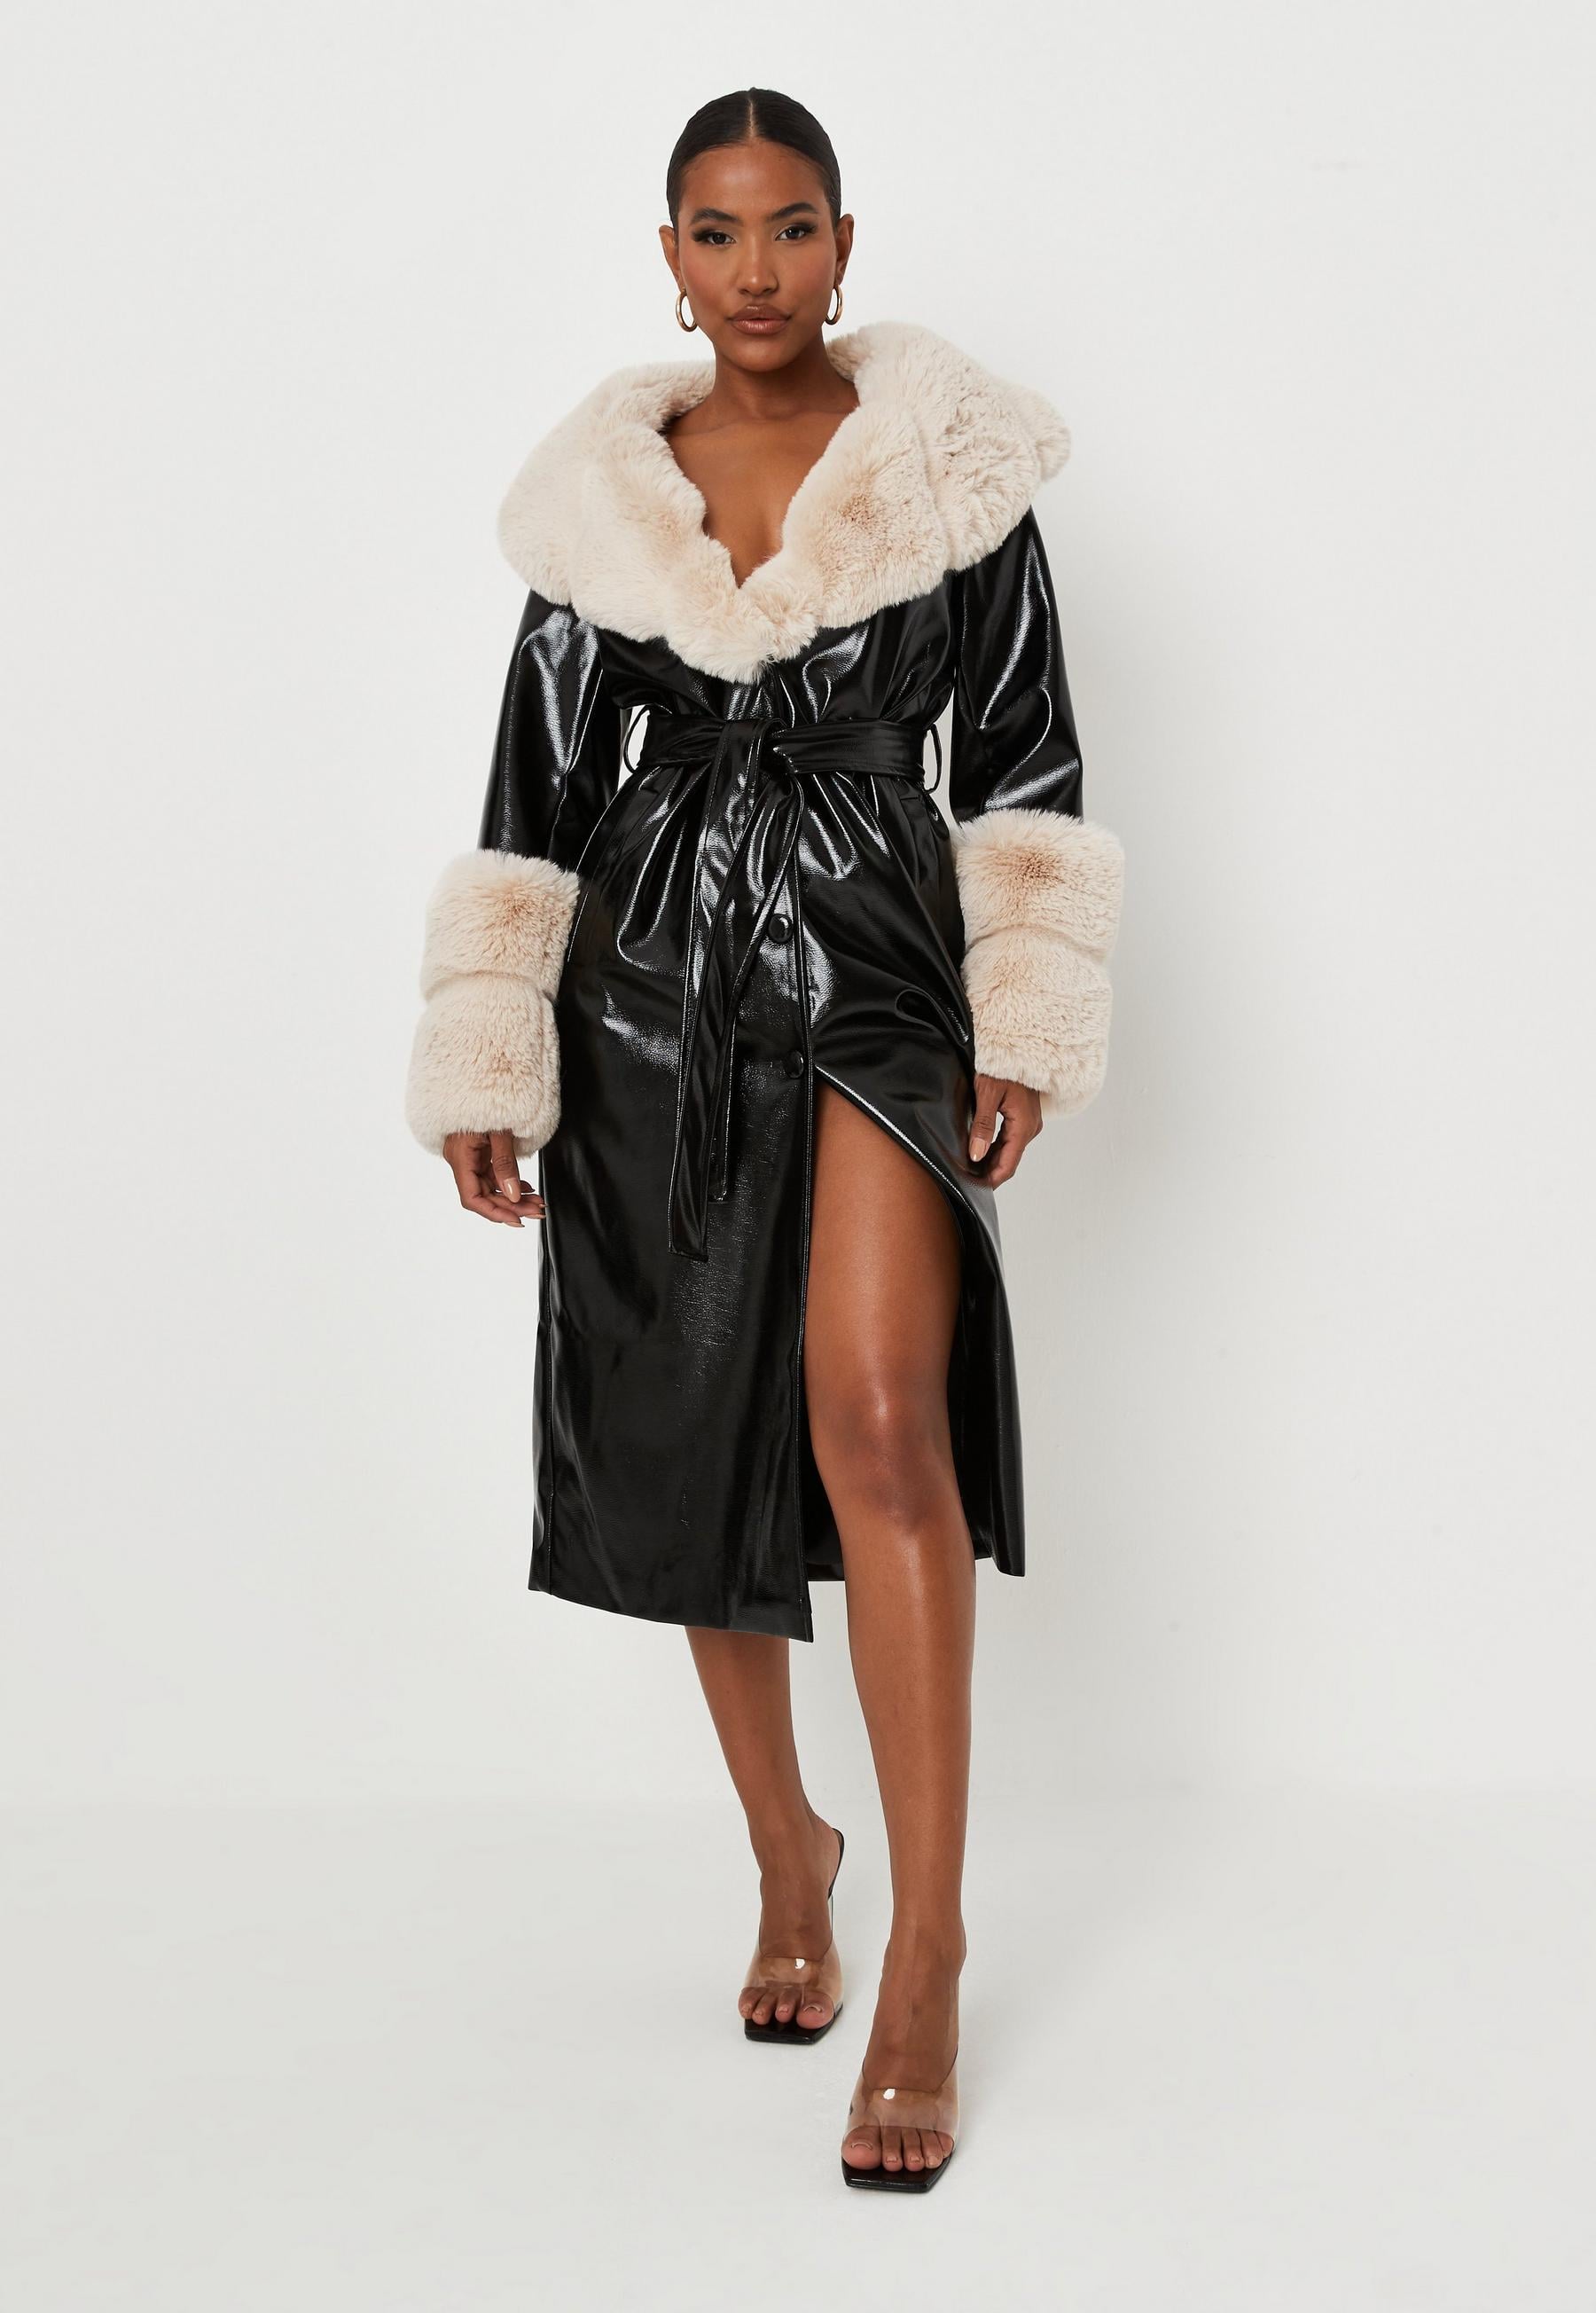 Urban Outfitters Uo Glam Faux-fur Trim Coat in Brown